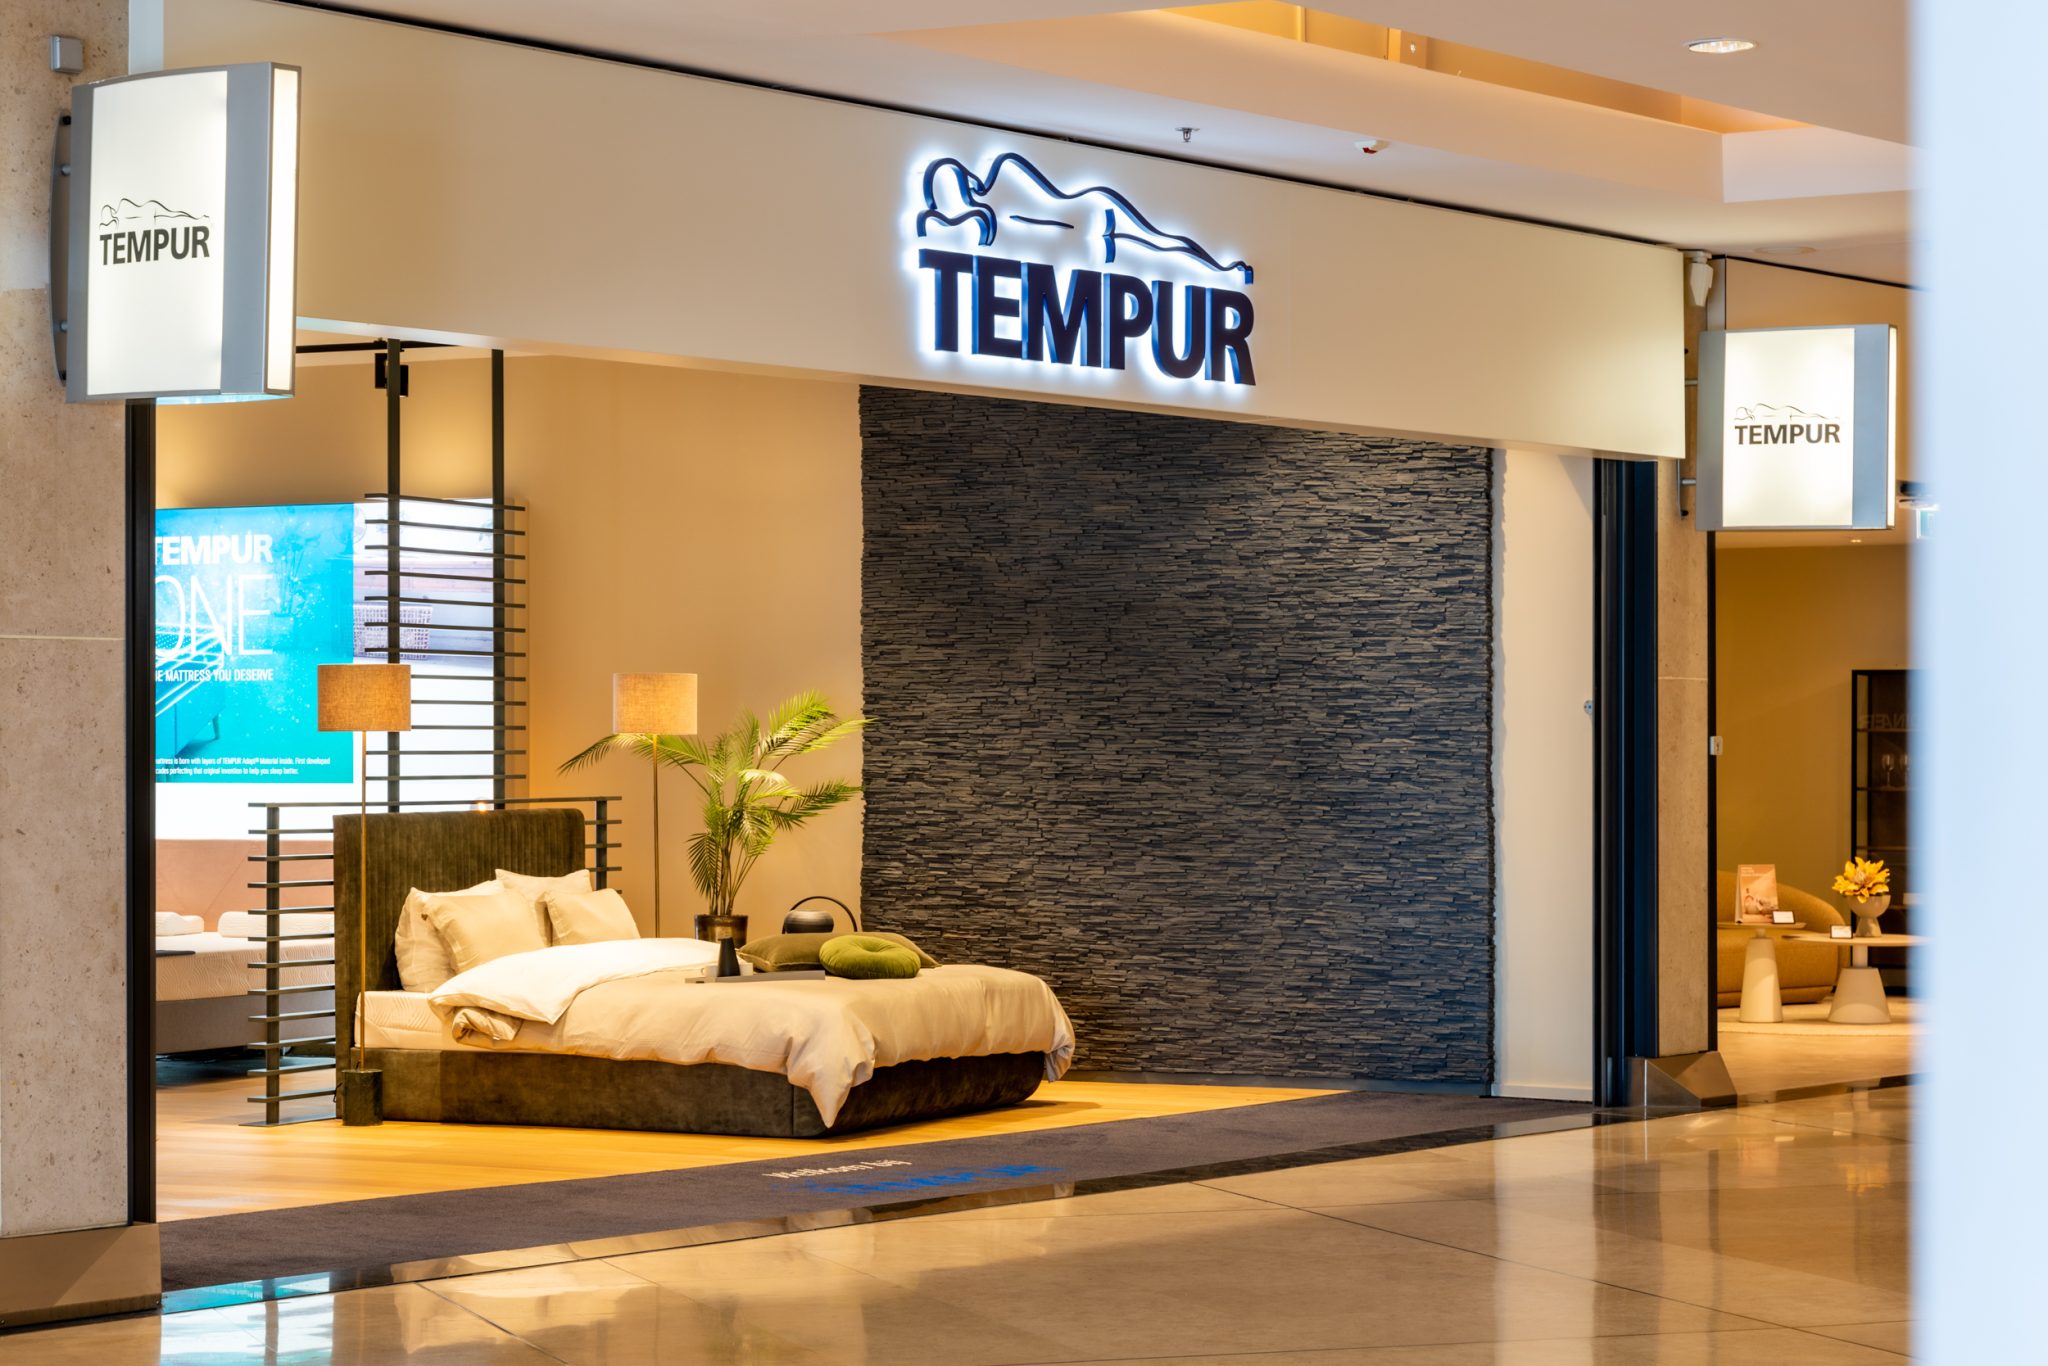 tempur rotterdam by the image partner (2)